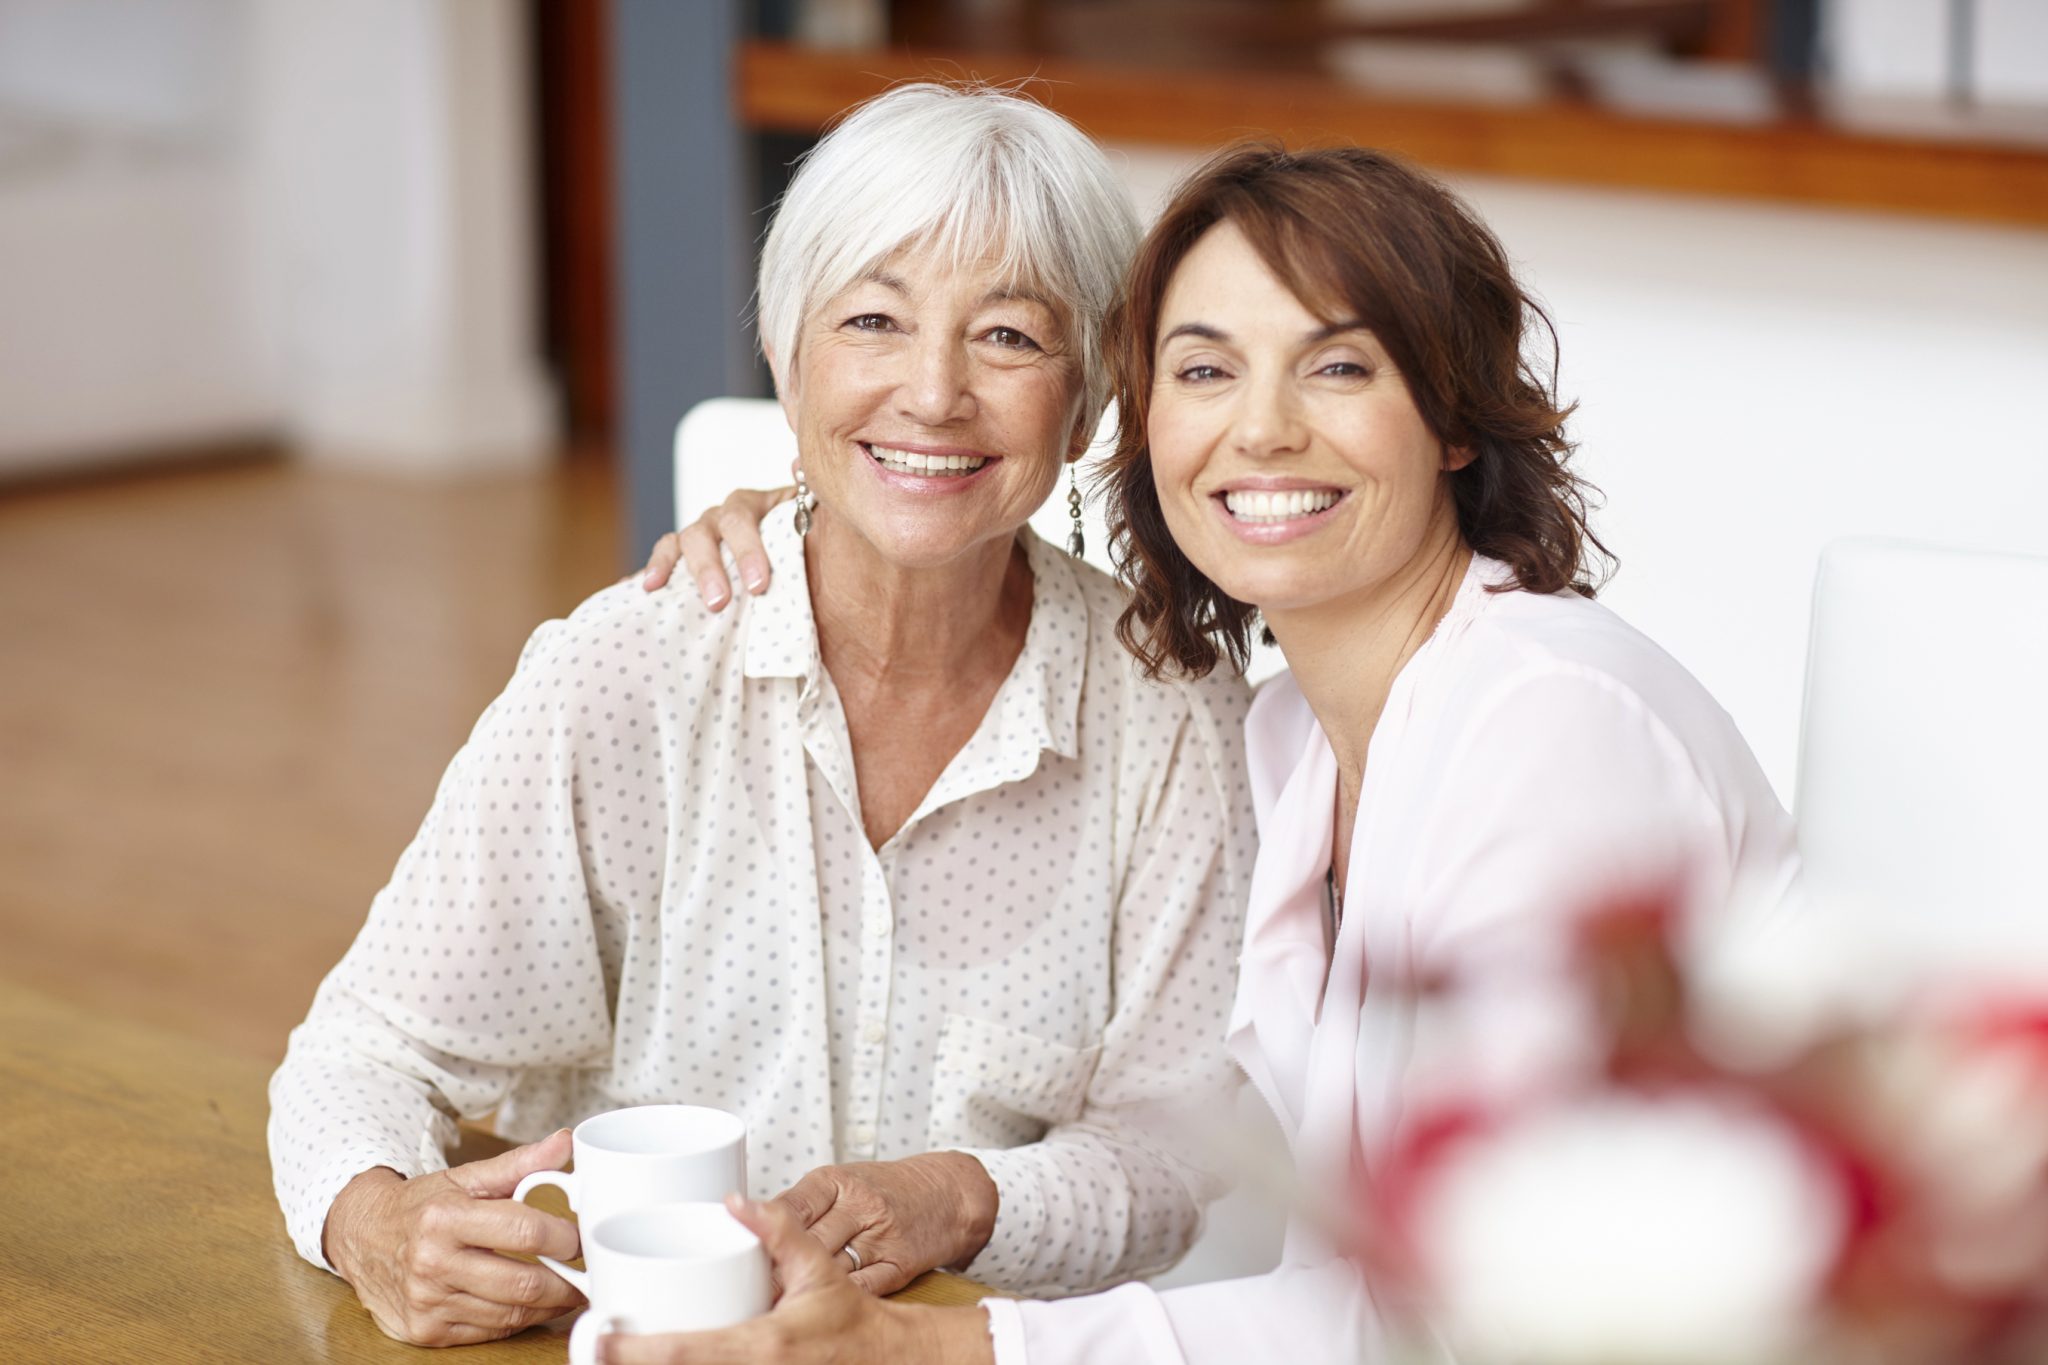 Woman and her mother with dental implants spending time together.